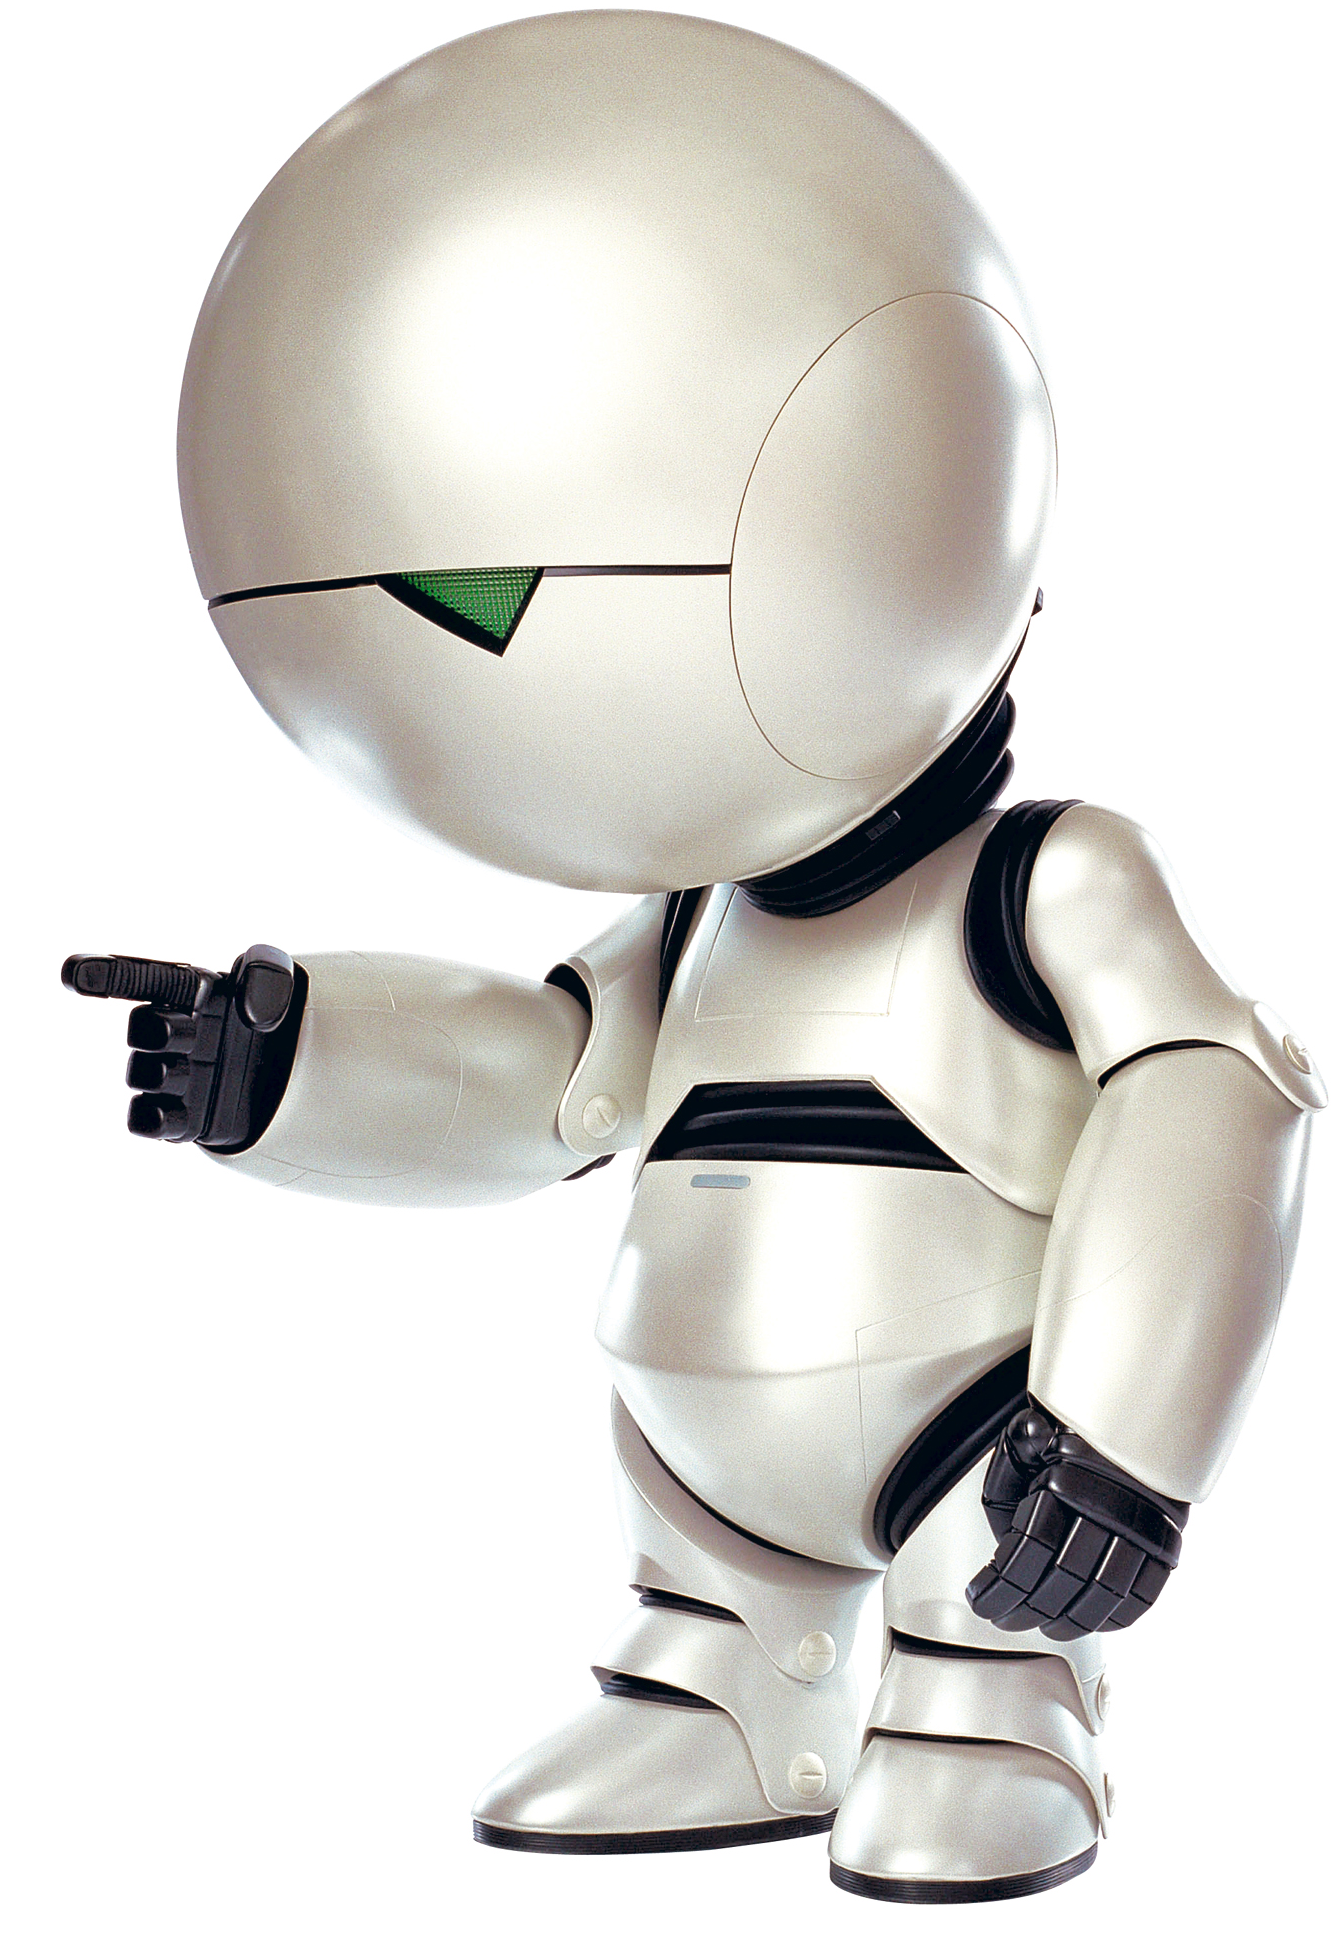 marvin the paranoid android